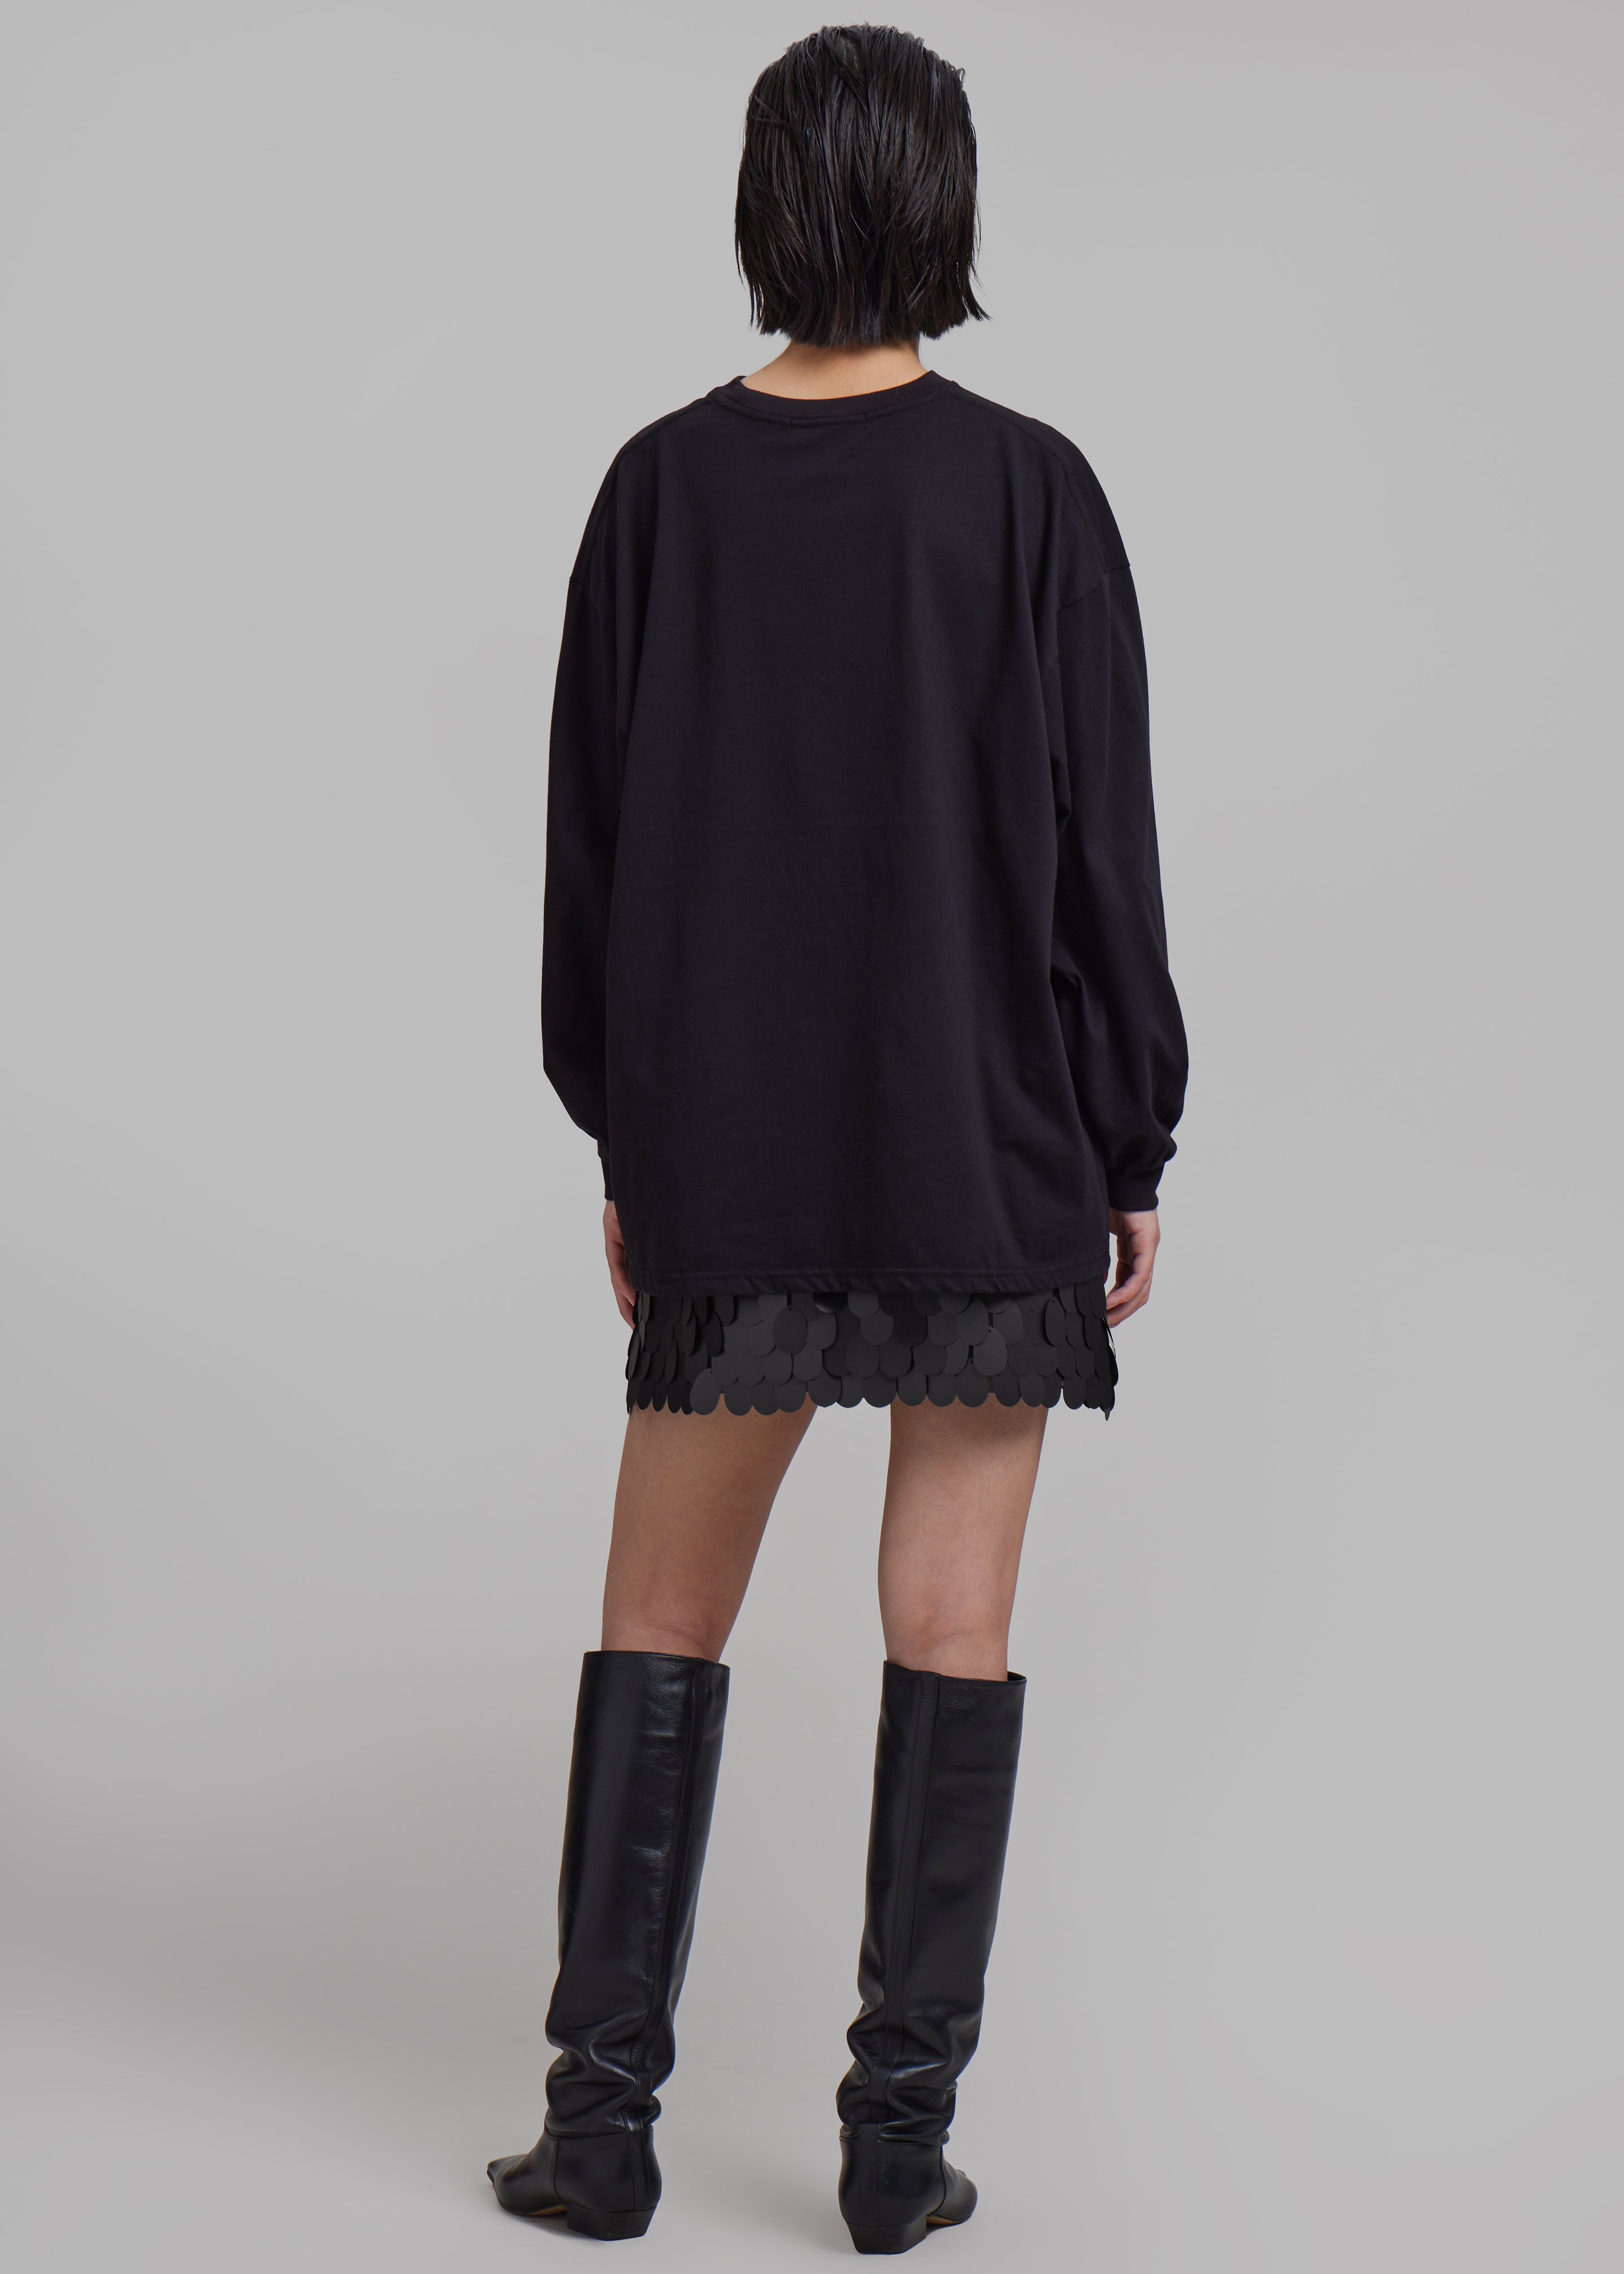 Tommy Boxy Long Sleeves Tee - Black - 6